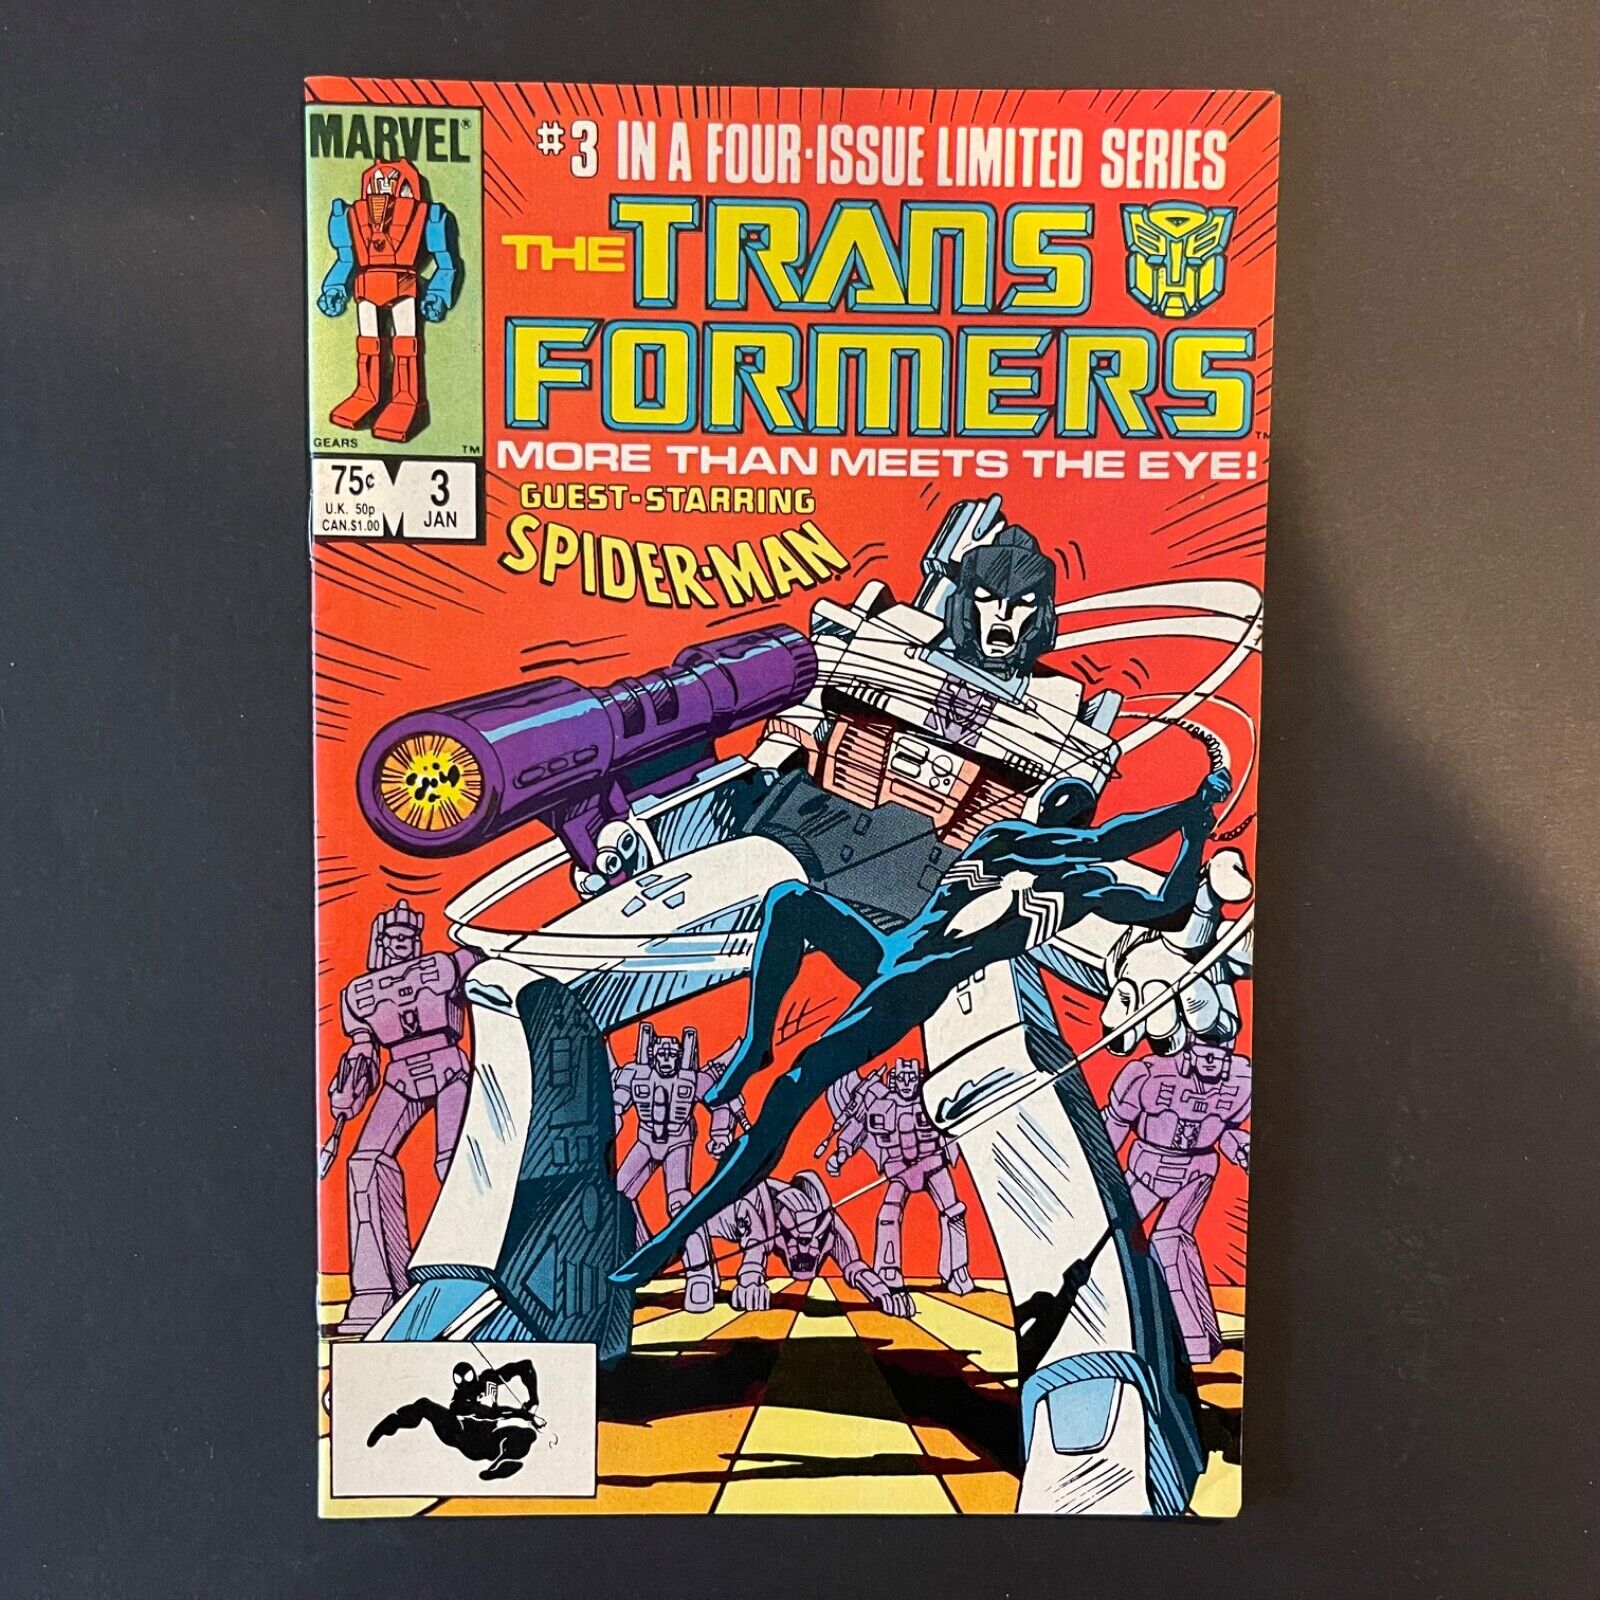 TRANSFORMERS #3 MARVEL COMICS 1985 SPIDER-MAN CROSSOVER APPEARANCE 1ST PRINTING